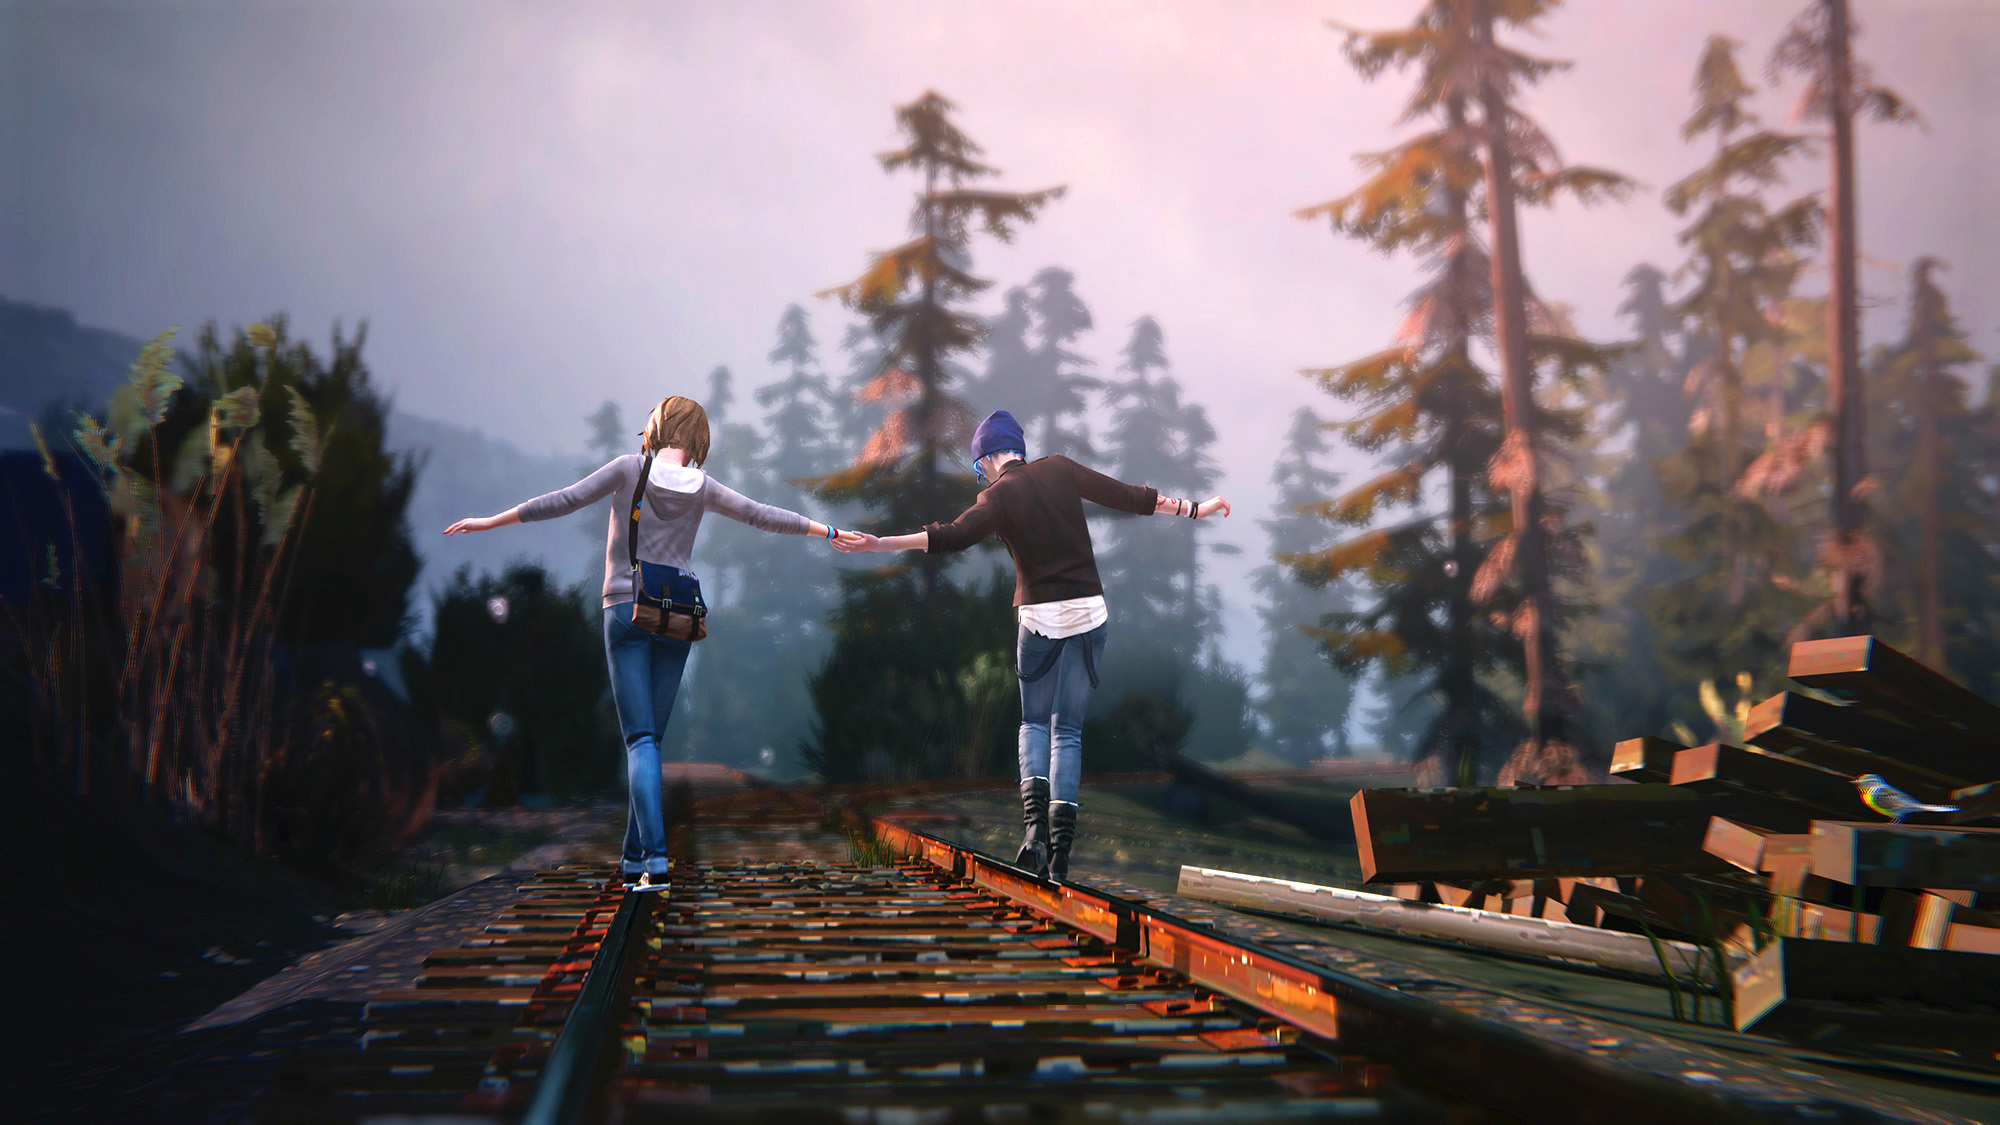 Life Is Strange High Quality Background on Wallpapers Vista